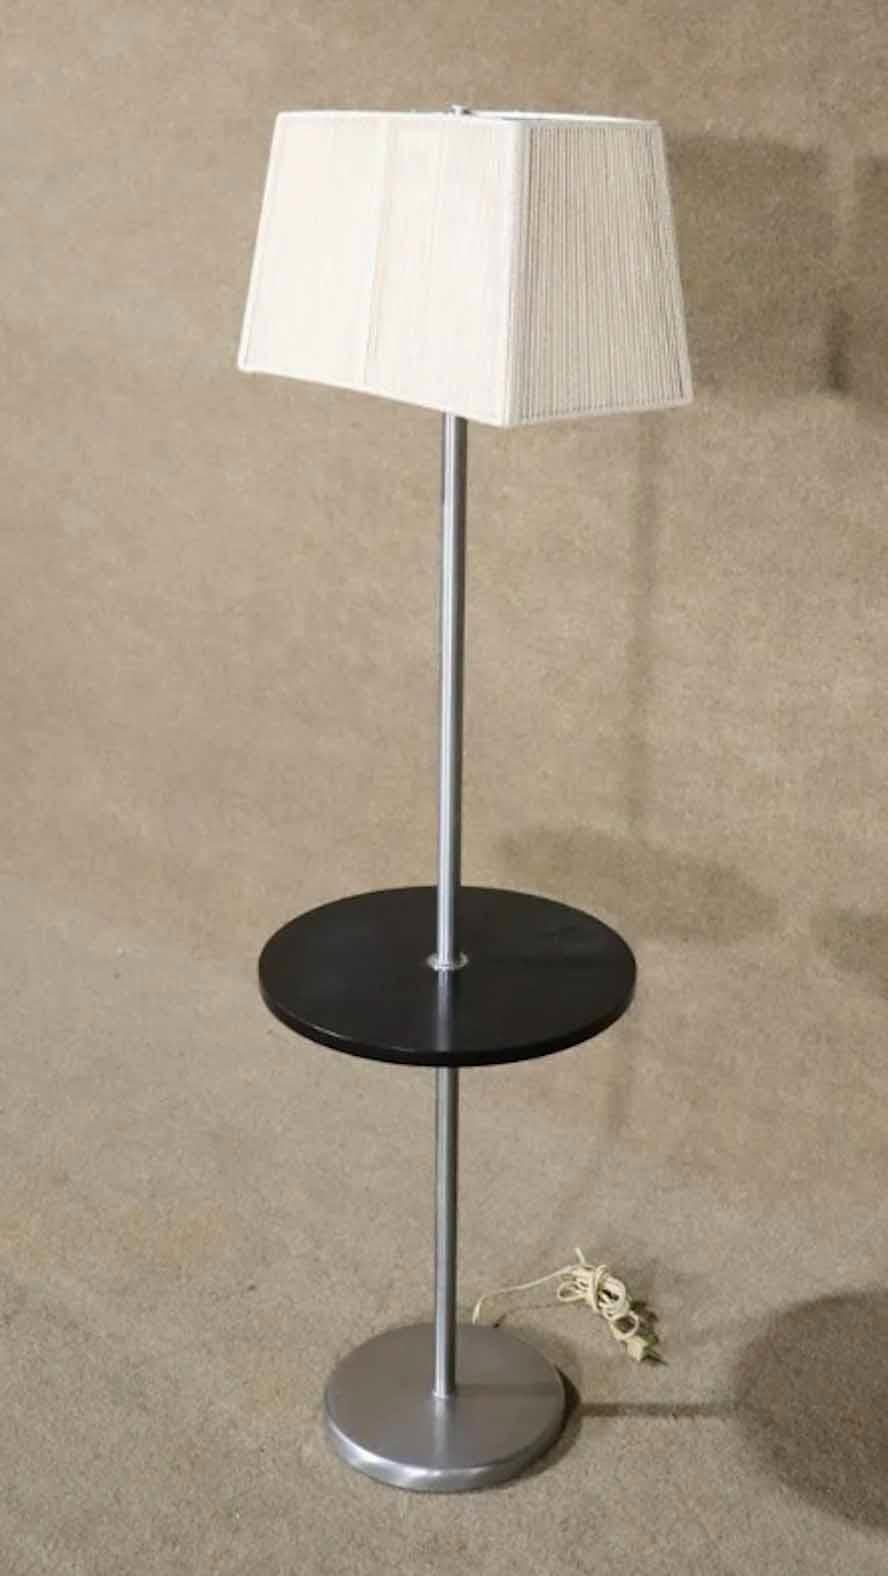 Mid-Century Modern style floor lamp with table. Chrome frame and wood table, designed by Nessen Studio.
Please confirm location.